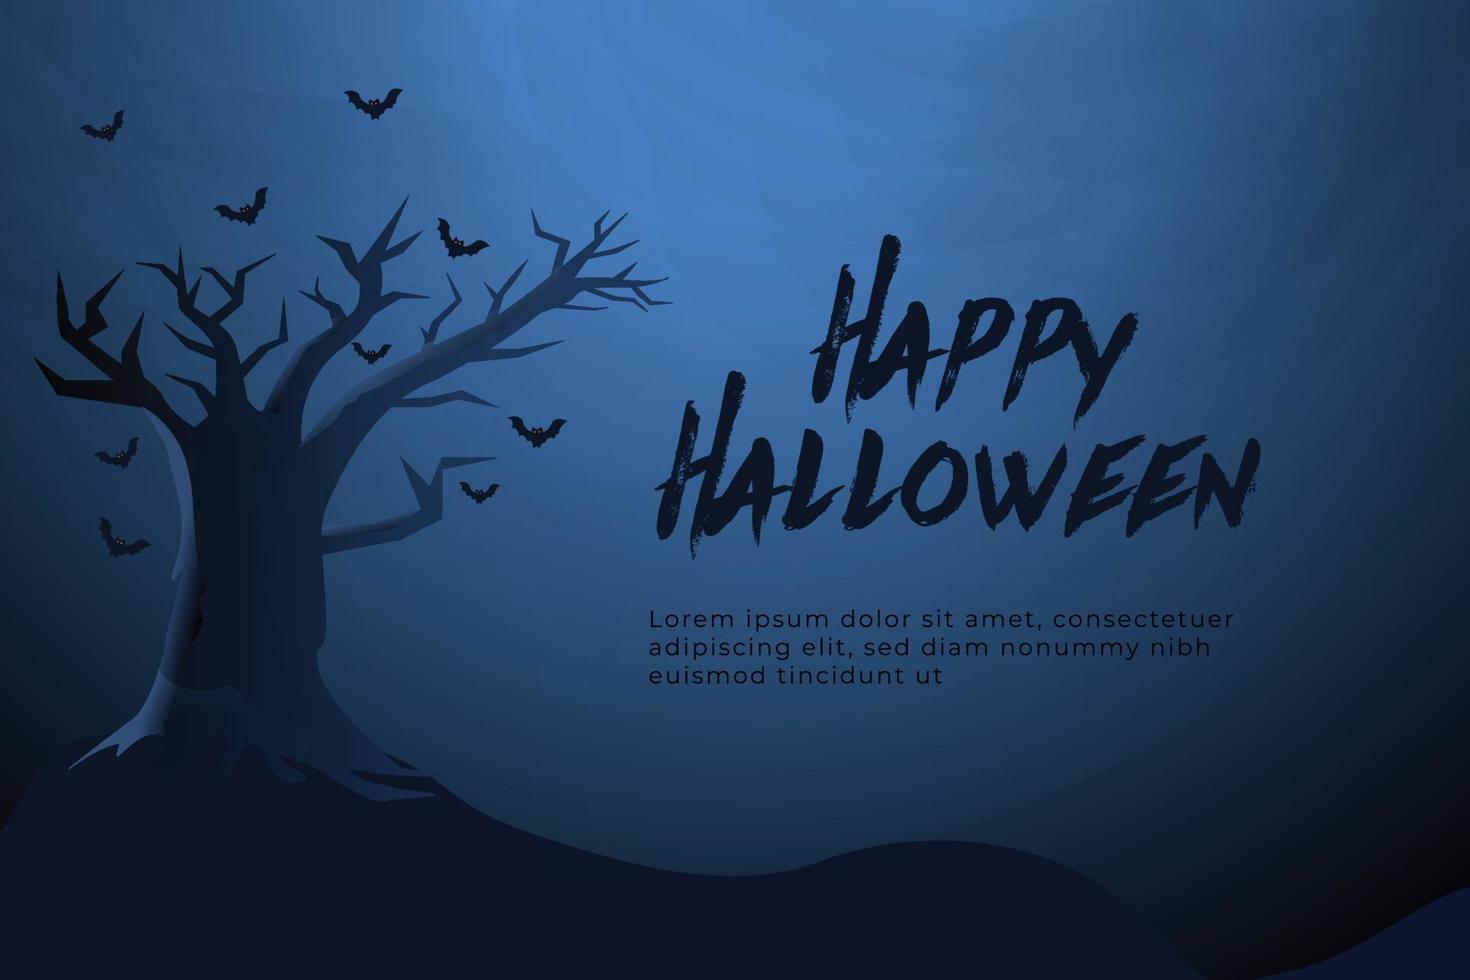 Happy Halloween background design with a horror tree vector